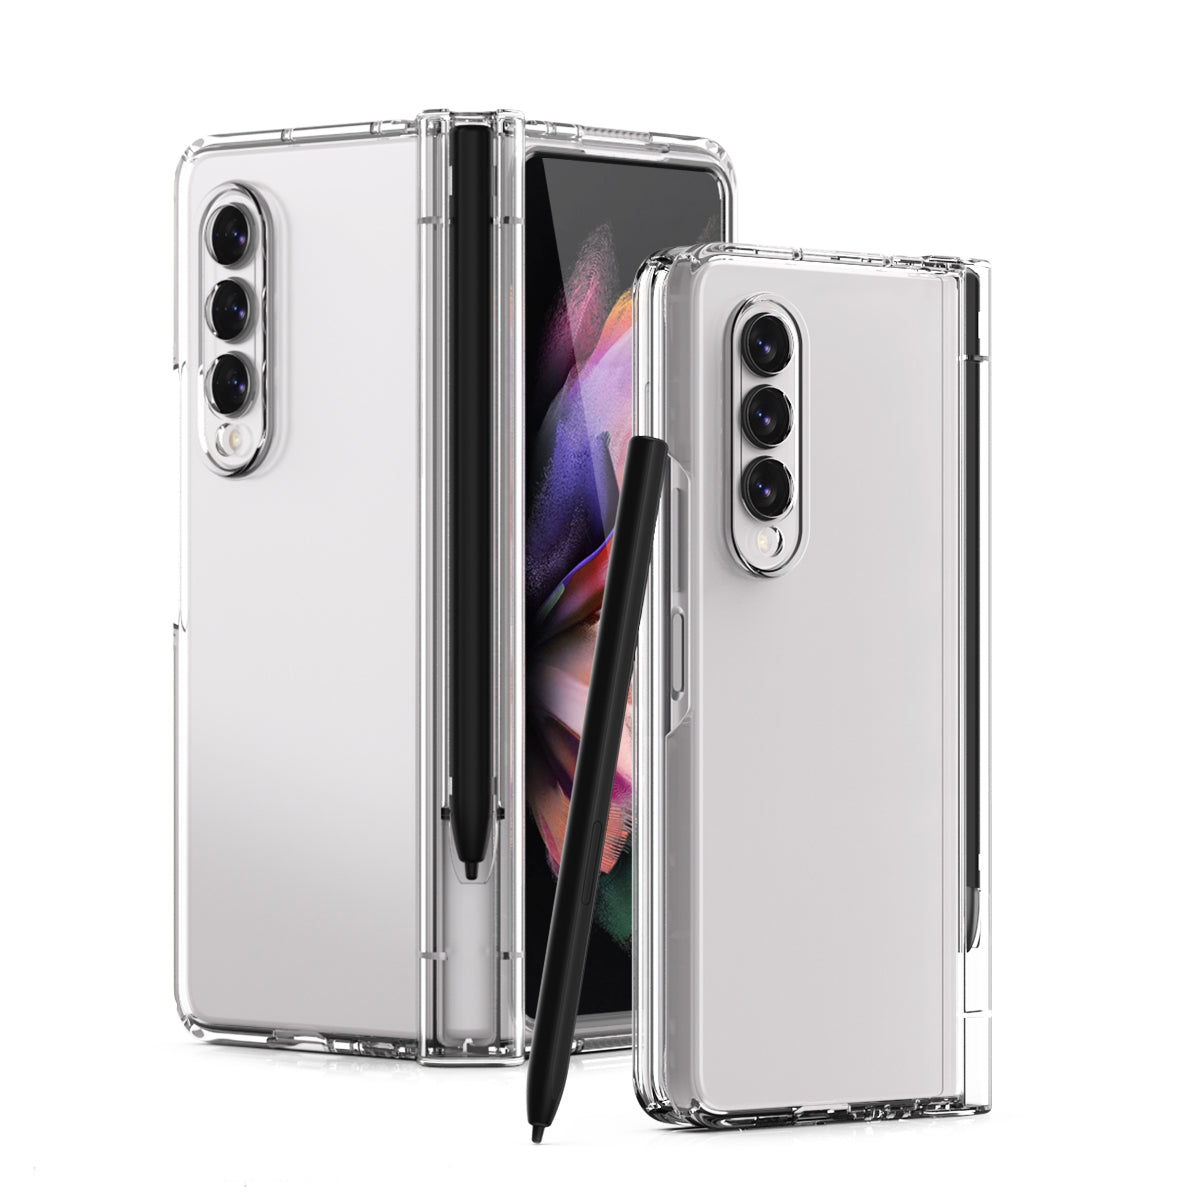 Folding All-inclusive Super Protective Case With Front Tempered Glass Film Hinge S Pen Slot For Galaxy Fold 3 5G